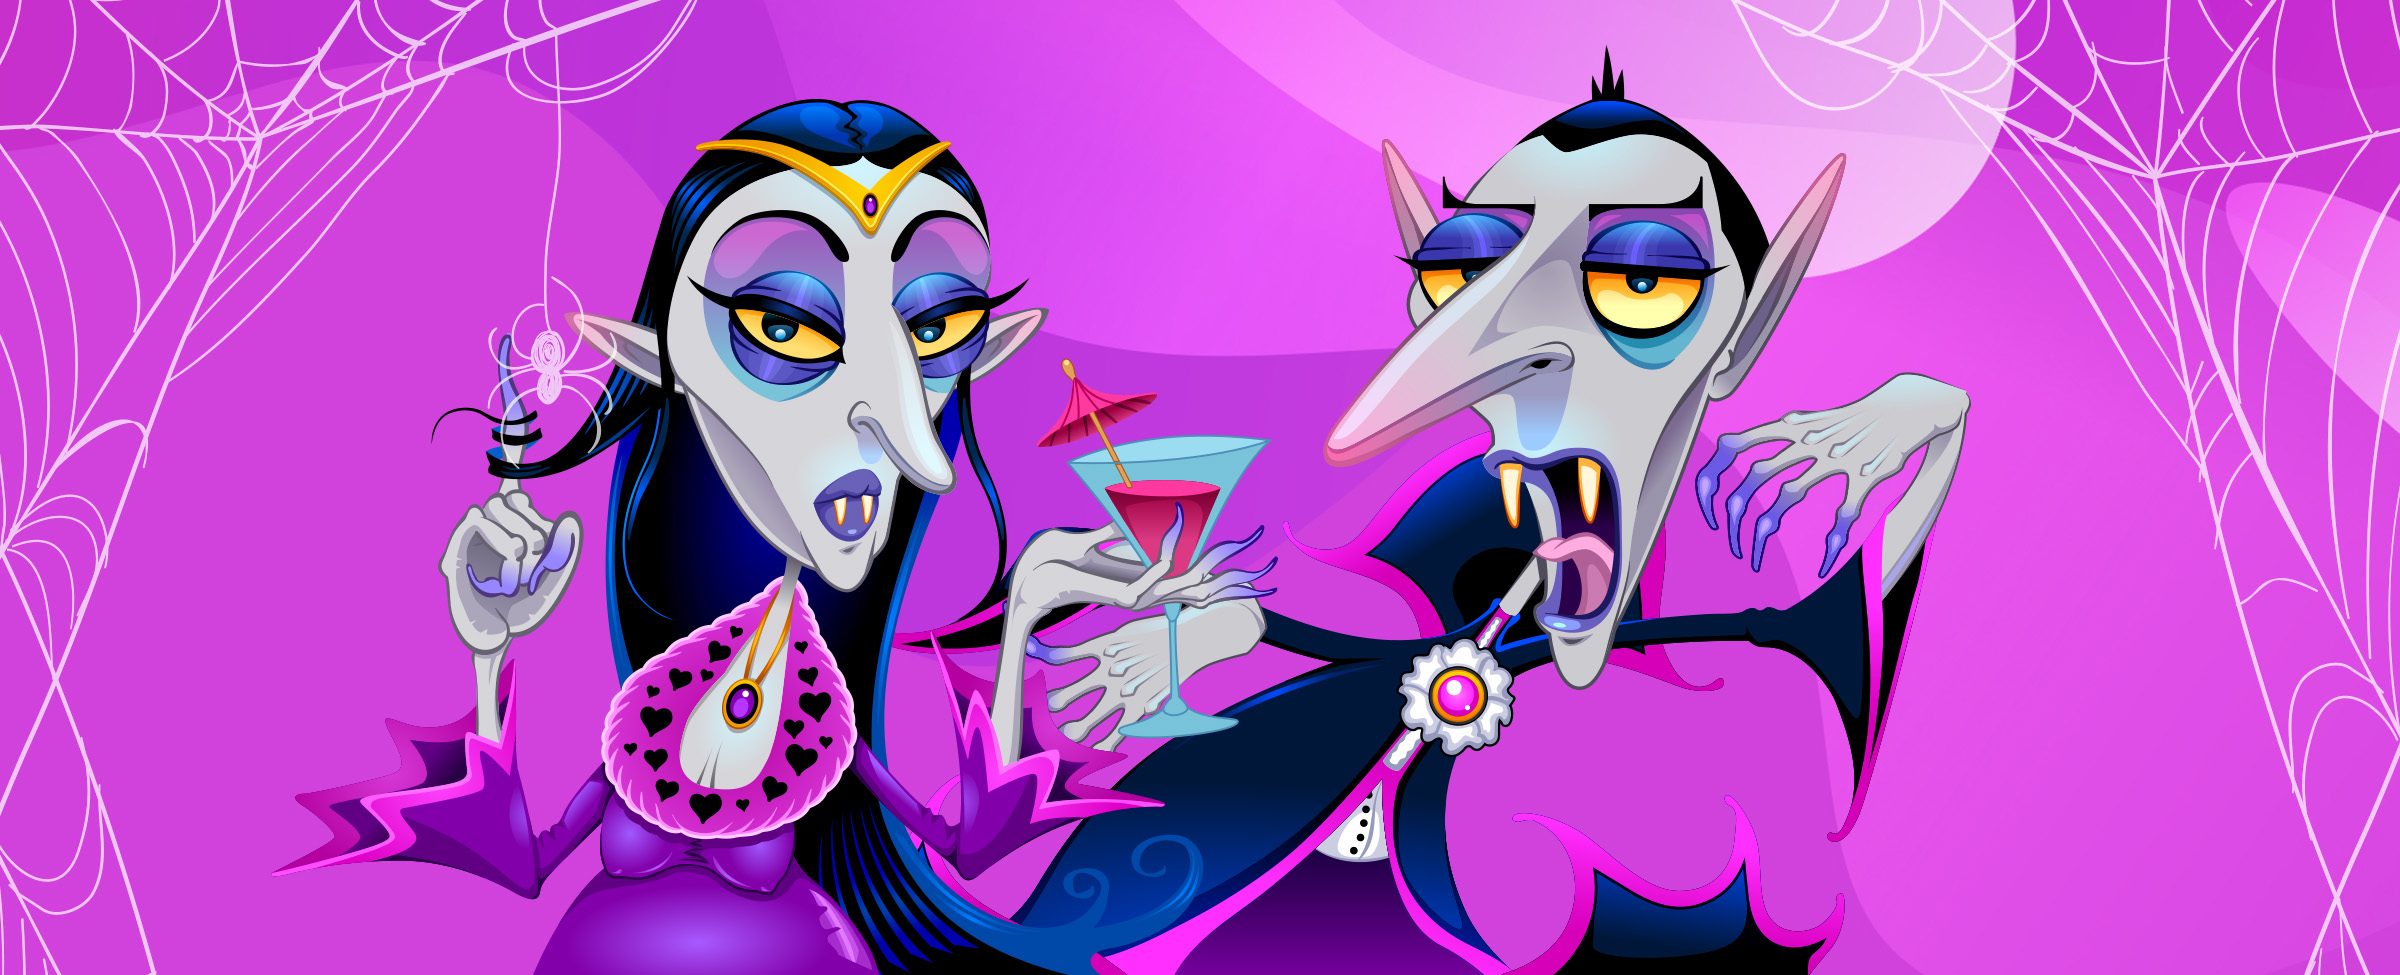 Two blood-thirsty cartoon vampires with one holding a glass of purple blood and one opening its fangs for a bite.